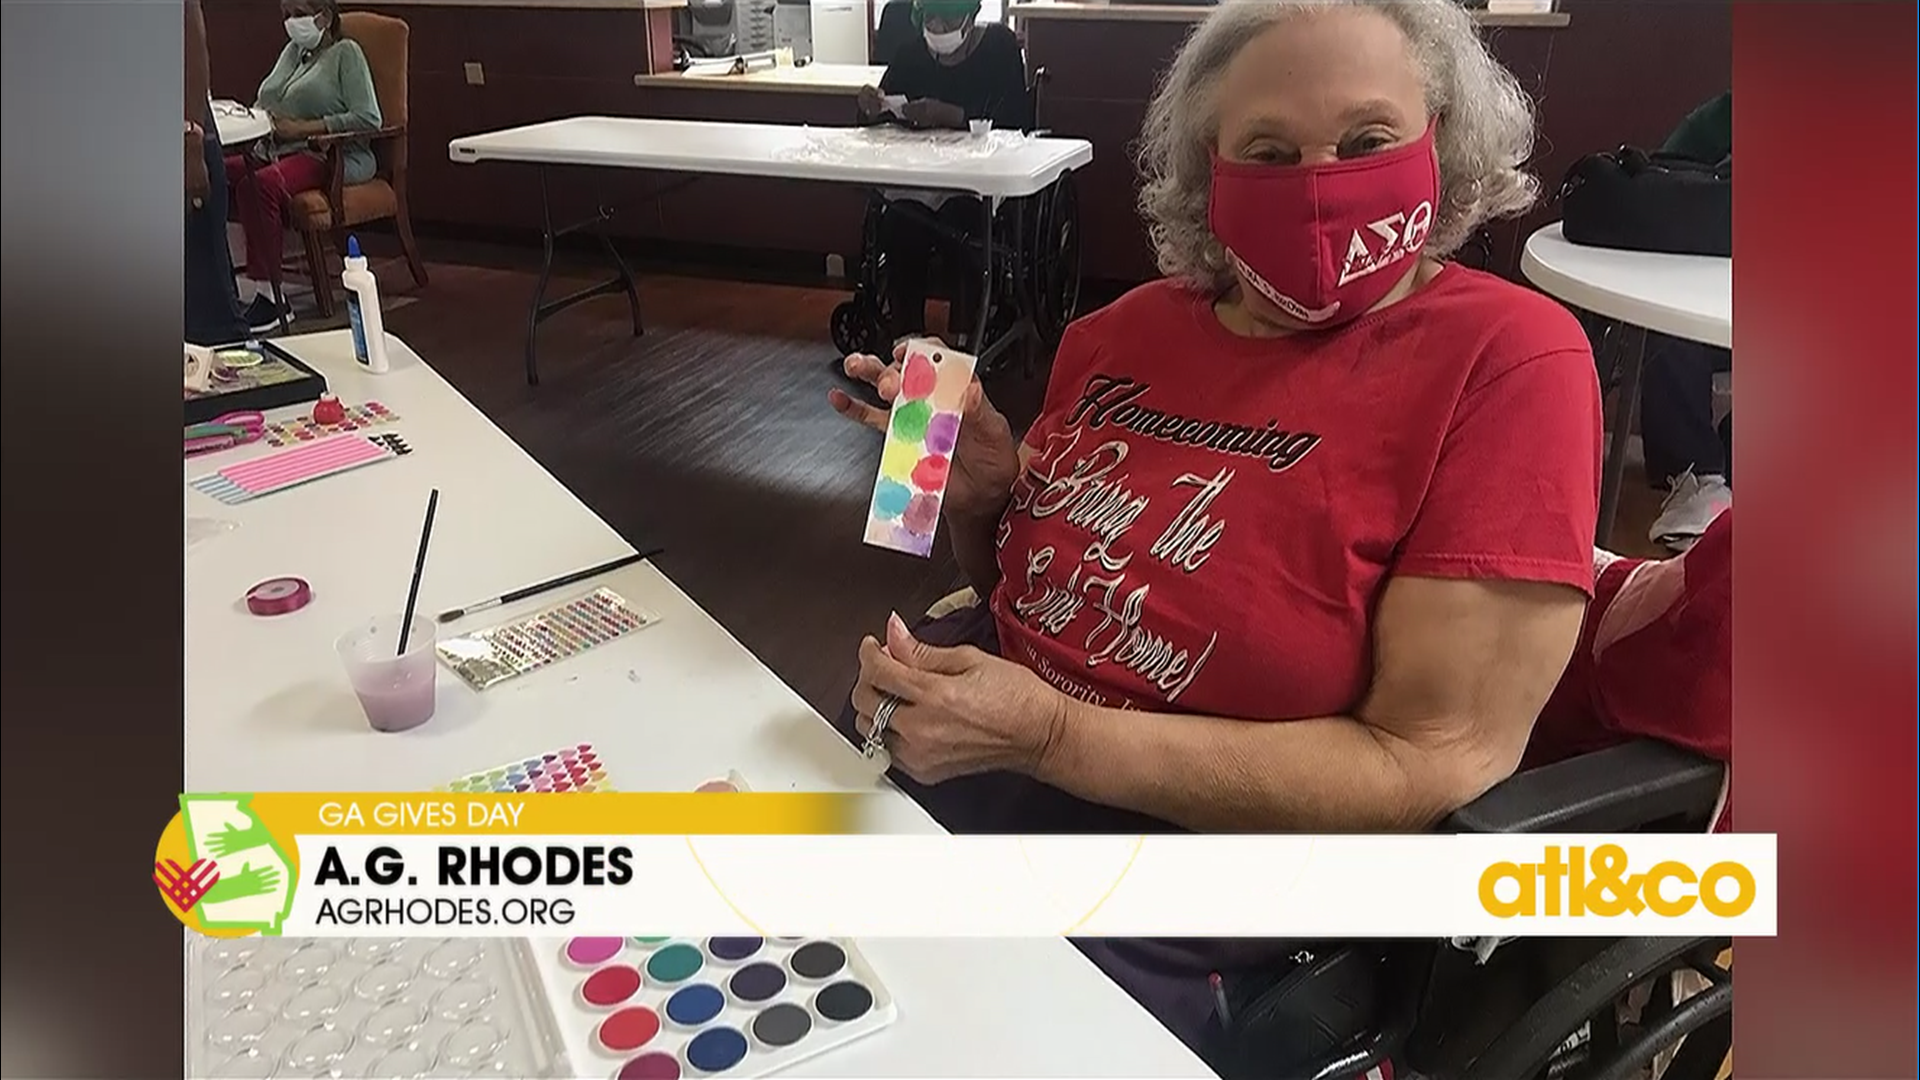 As one of Atlanta’s oldest nonprofits, see how A.G. Rhodes provides senior rehab services and long-term care. A&C celebrates GAgives on this Giving Tuesday.